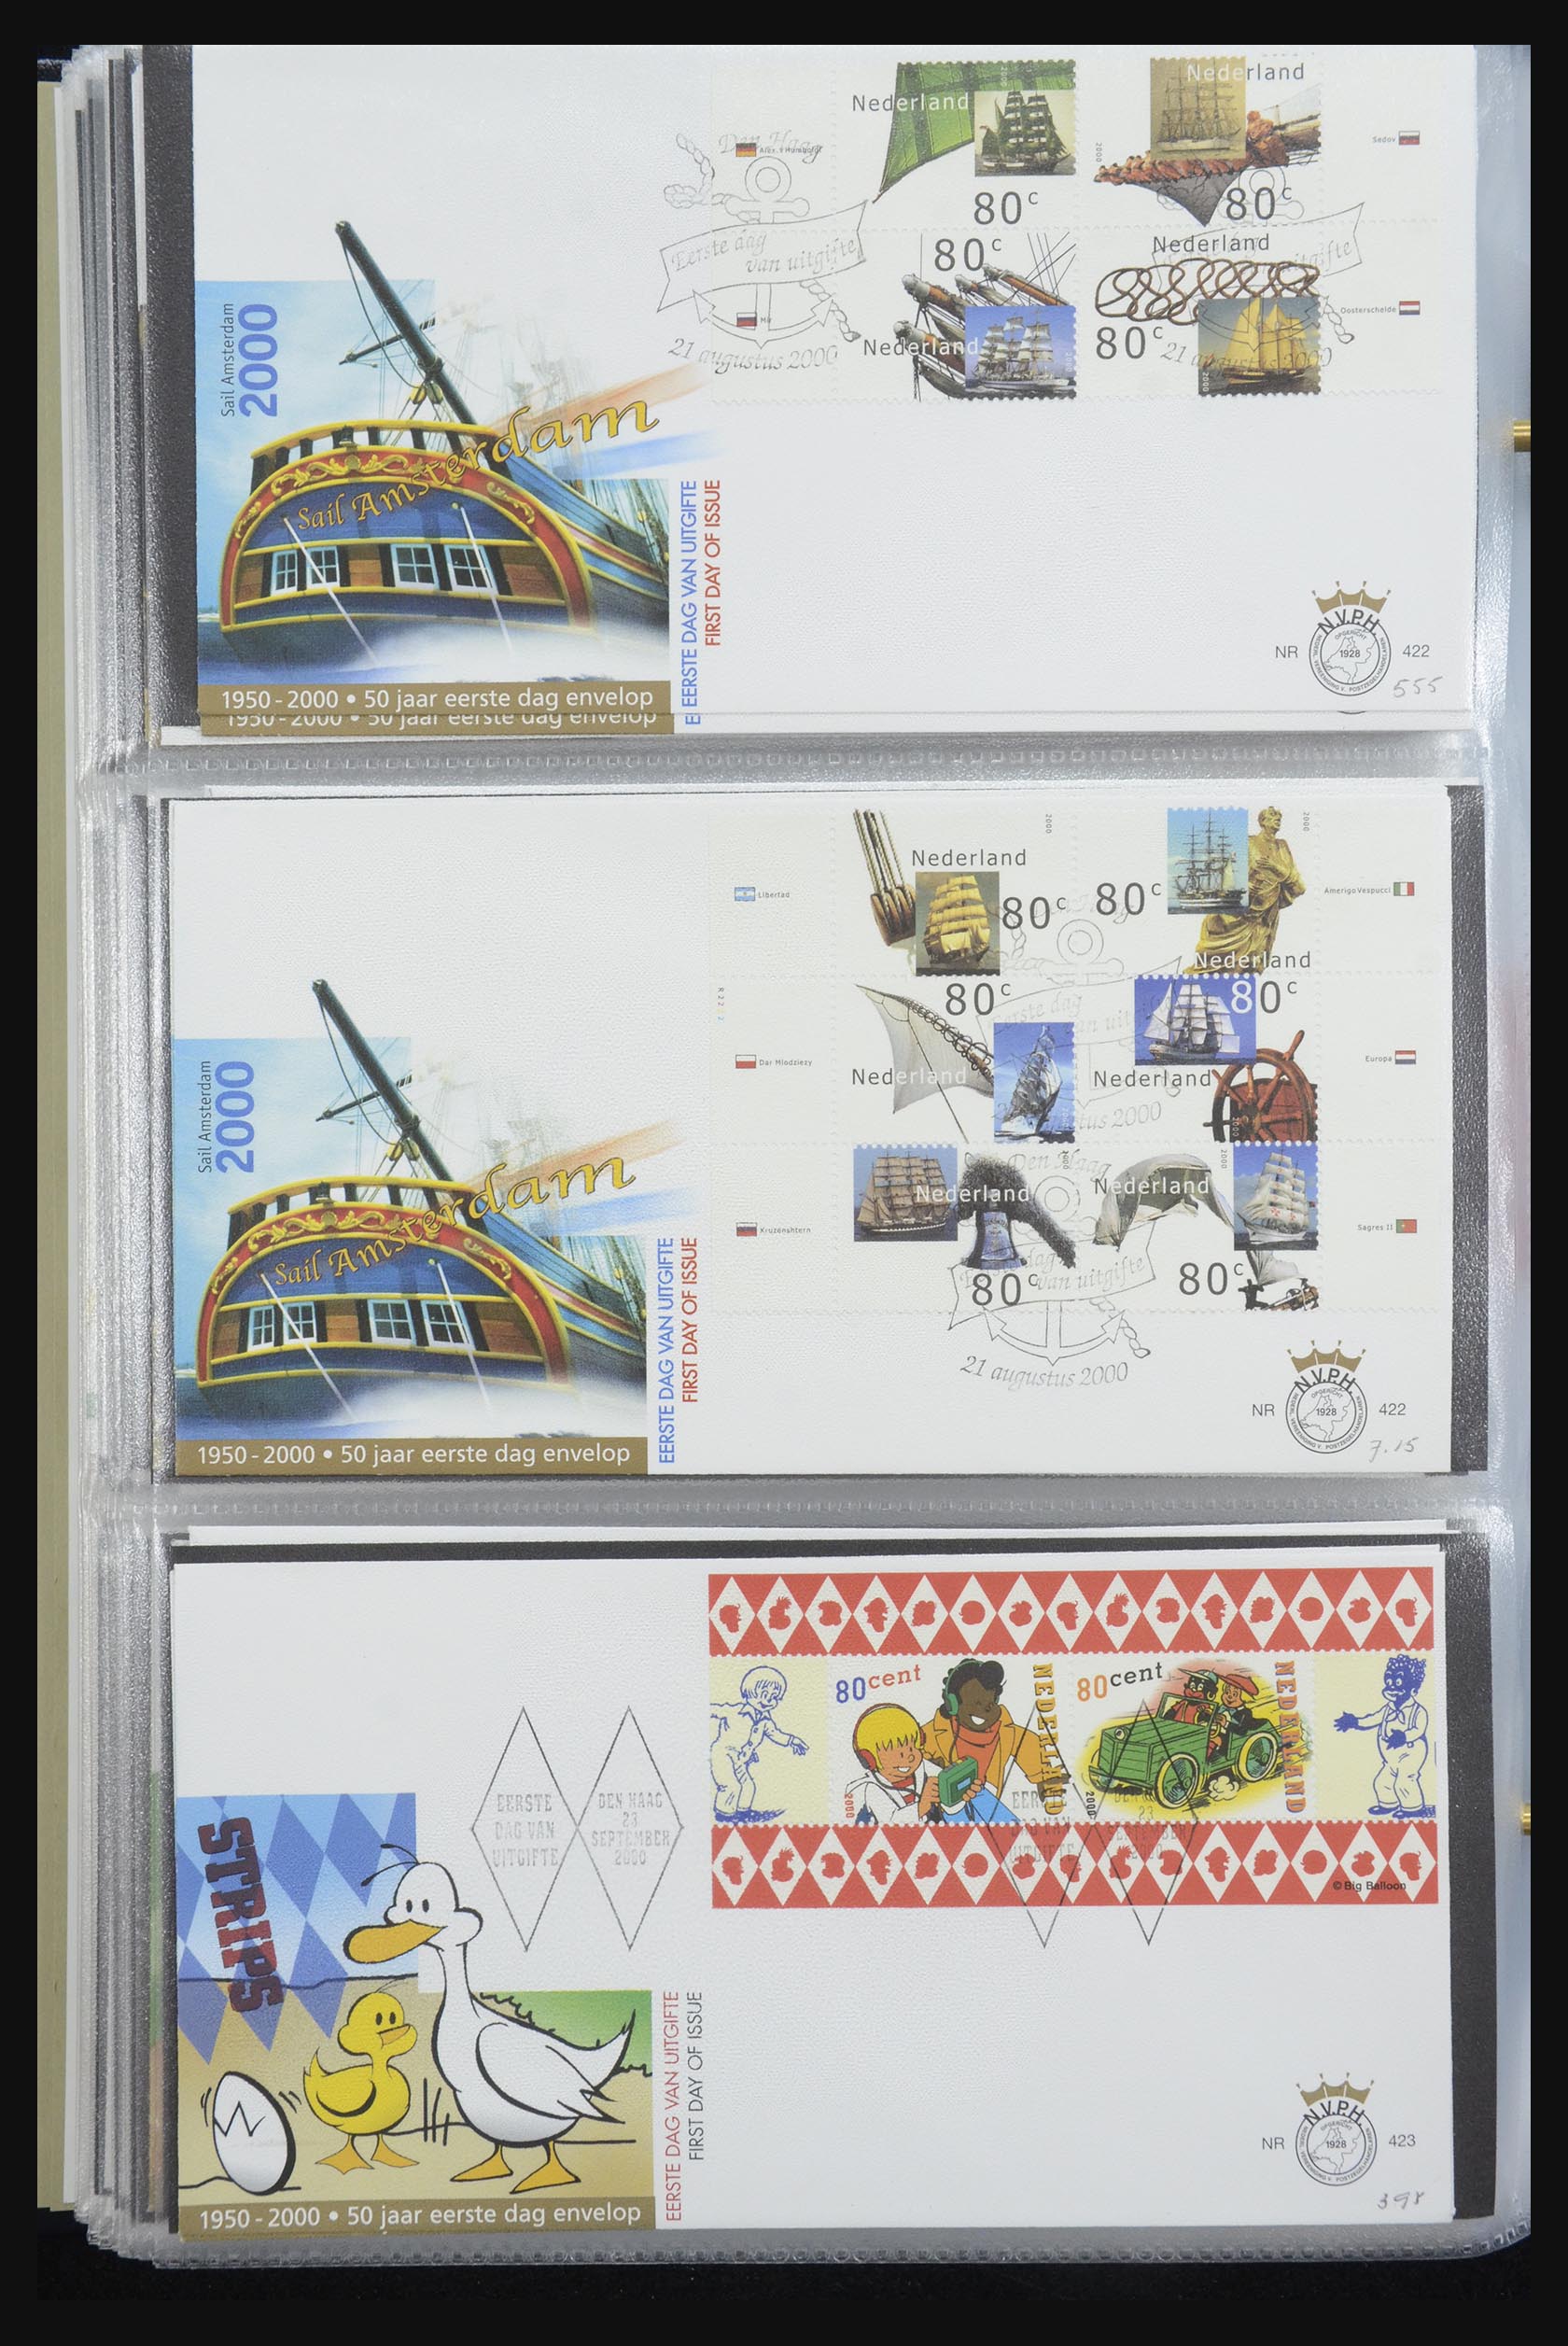 32170 159 - 32170 Netherlands FDC's 1953-2004.